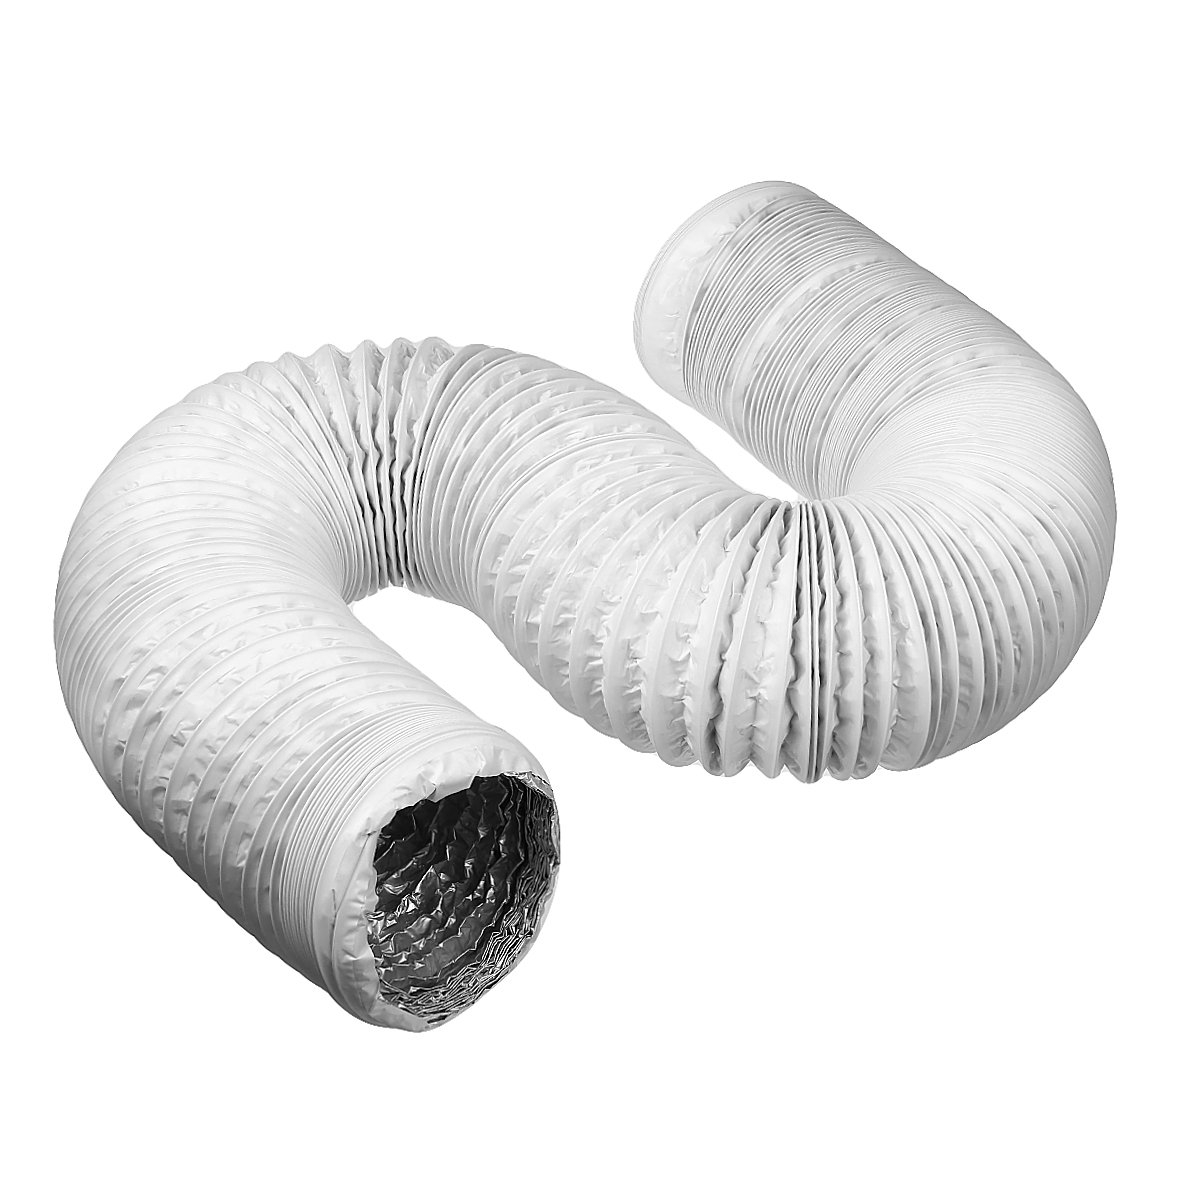 DIA15cm6-Inch-6M-Flexible-Air-Conditioner-Exhaust-Hose-For-Portable-Air-Conditioner-1556013-1